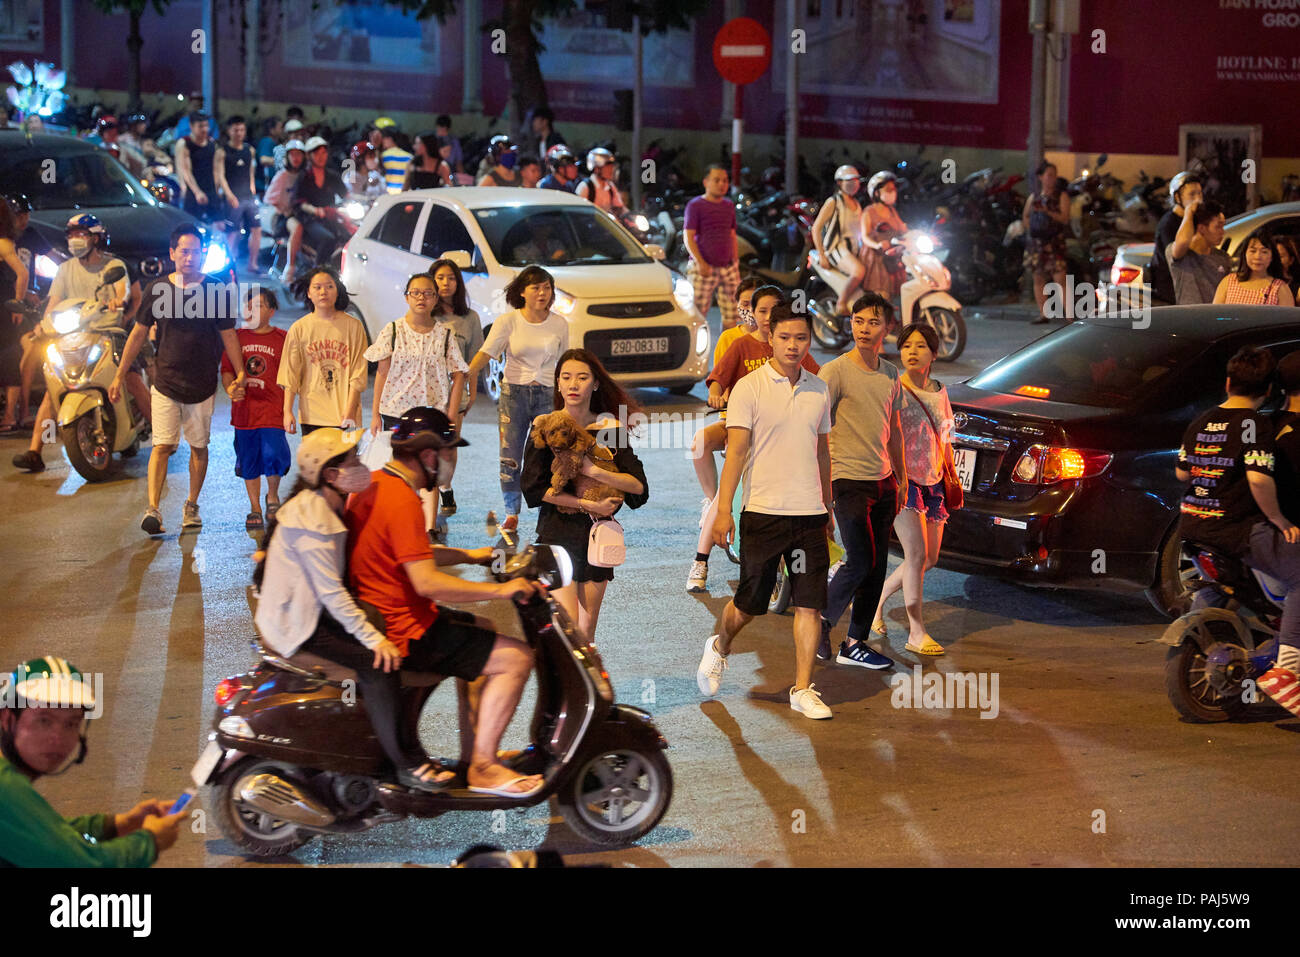 Night shot of pedestrians crossing road full of mopeds in busy